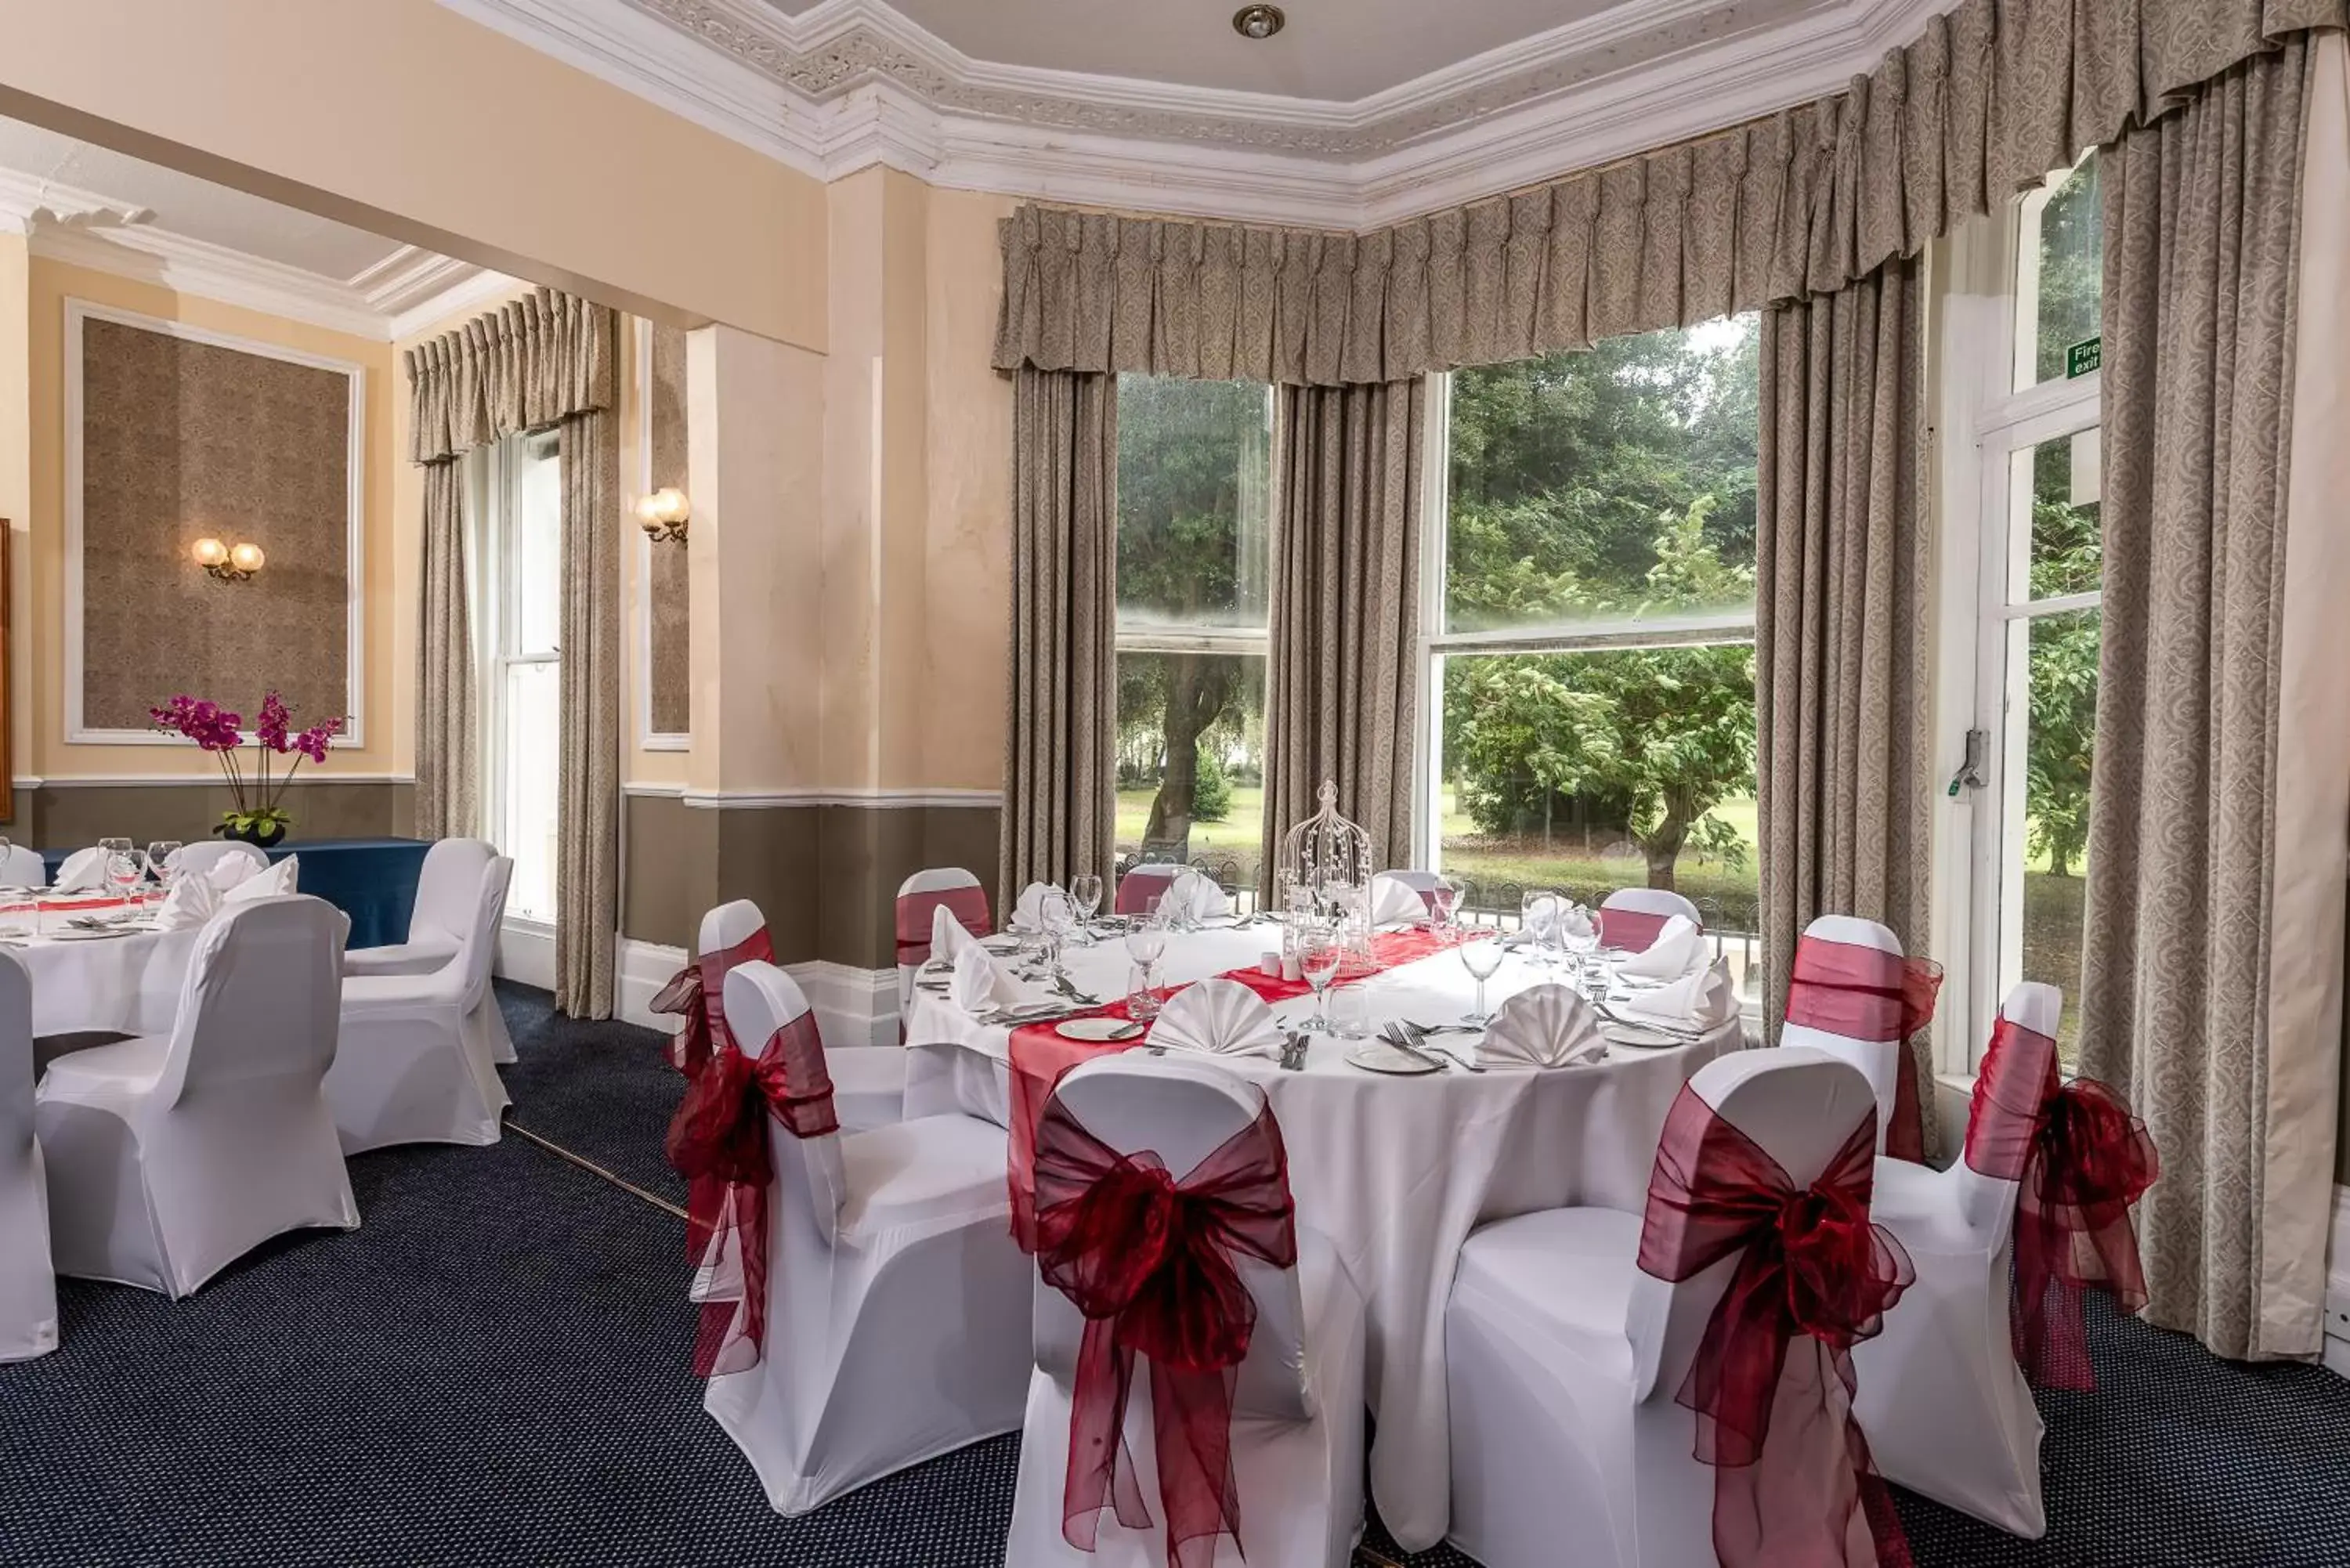 Banquet/Function facilities, Banquet Facilities in Best Western Clifton Hotel- One of the best coastal views in Folkestone